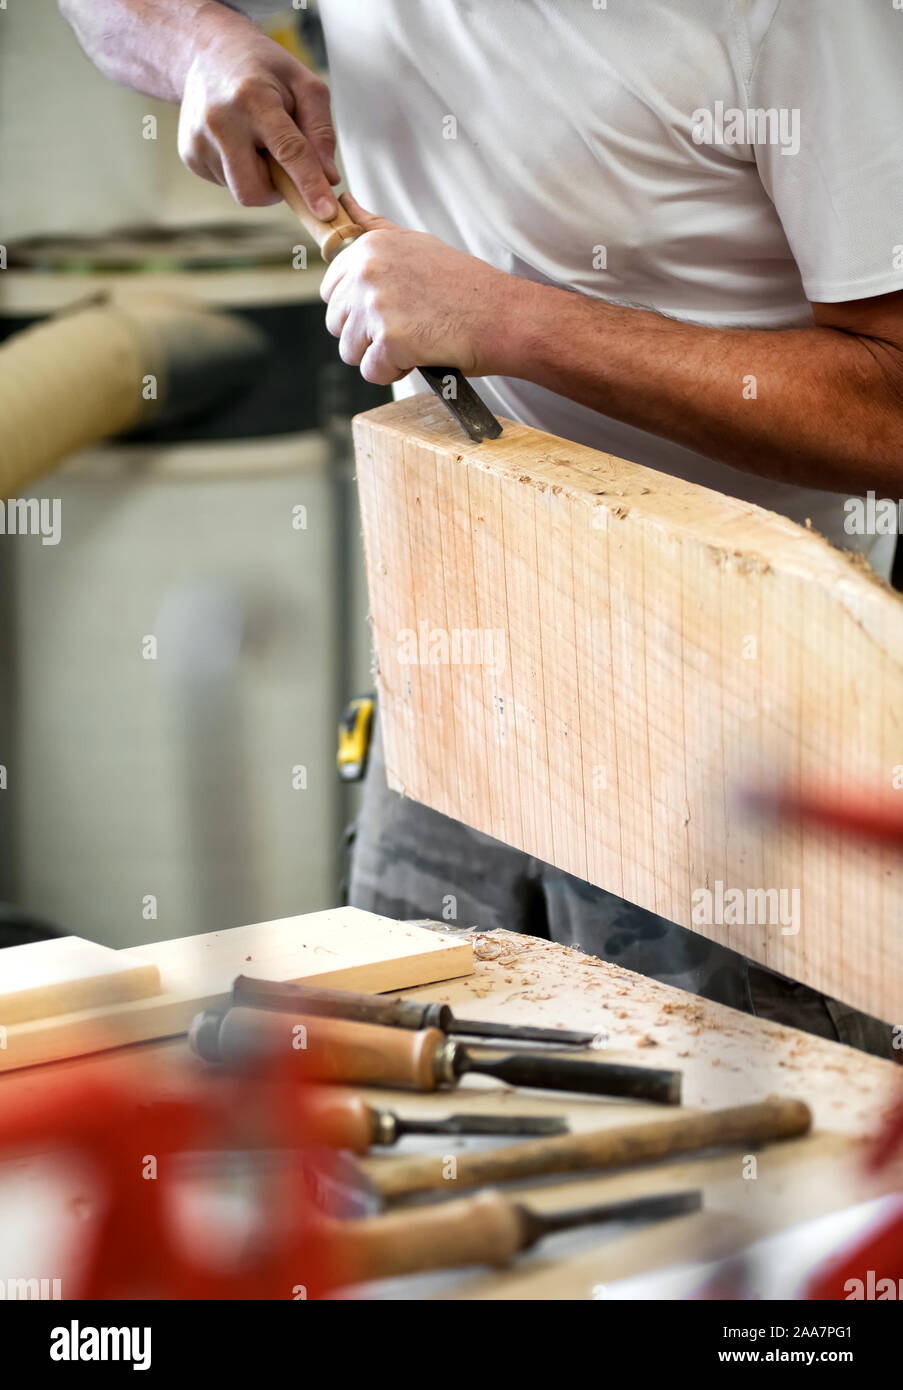 Carpenter working on a block of wood with a chisel in a close up on his hands with assorted hand tools on the workbench in the foreground Stock Photo